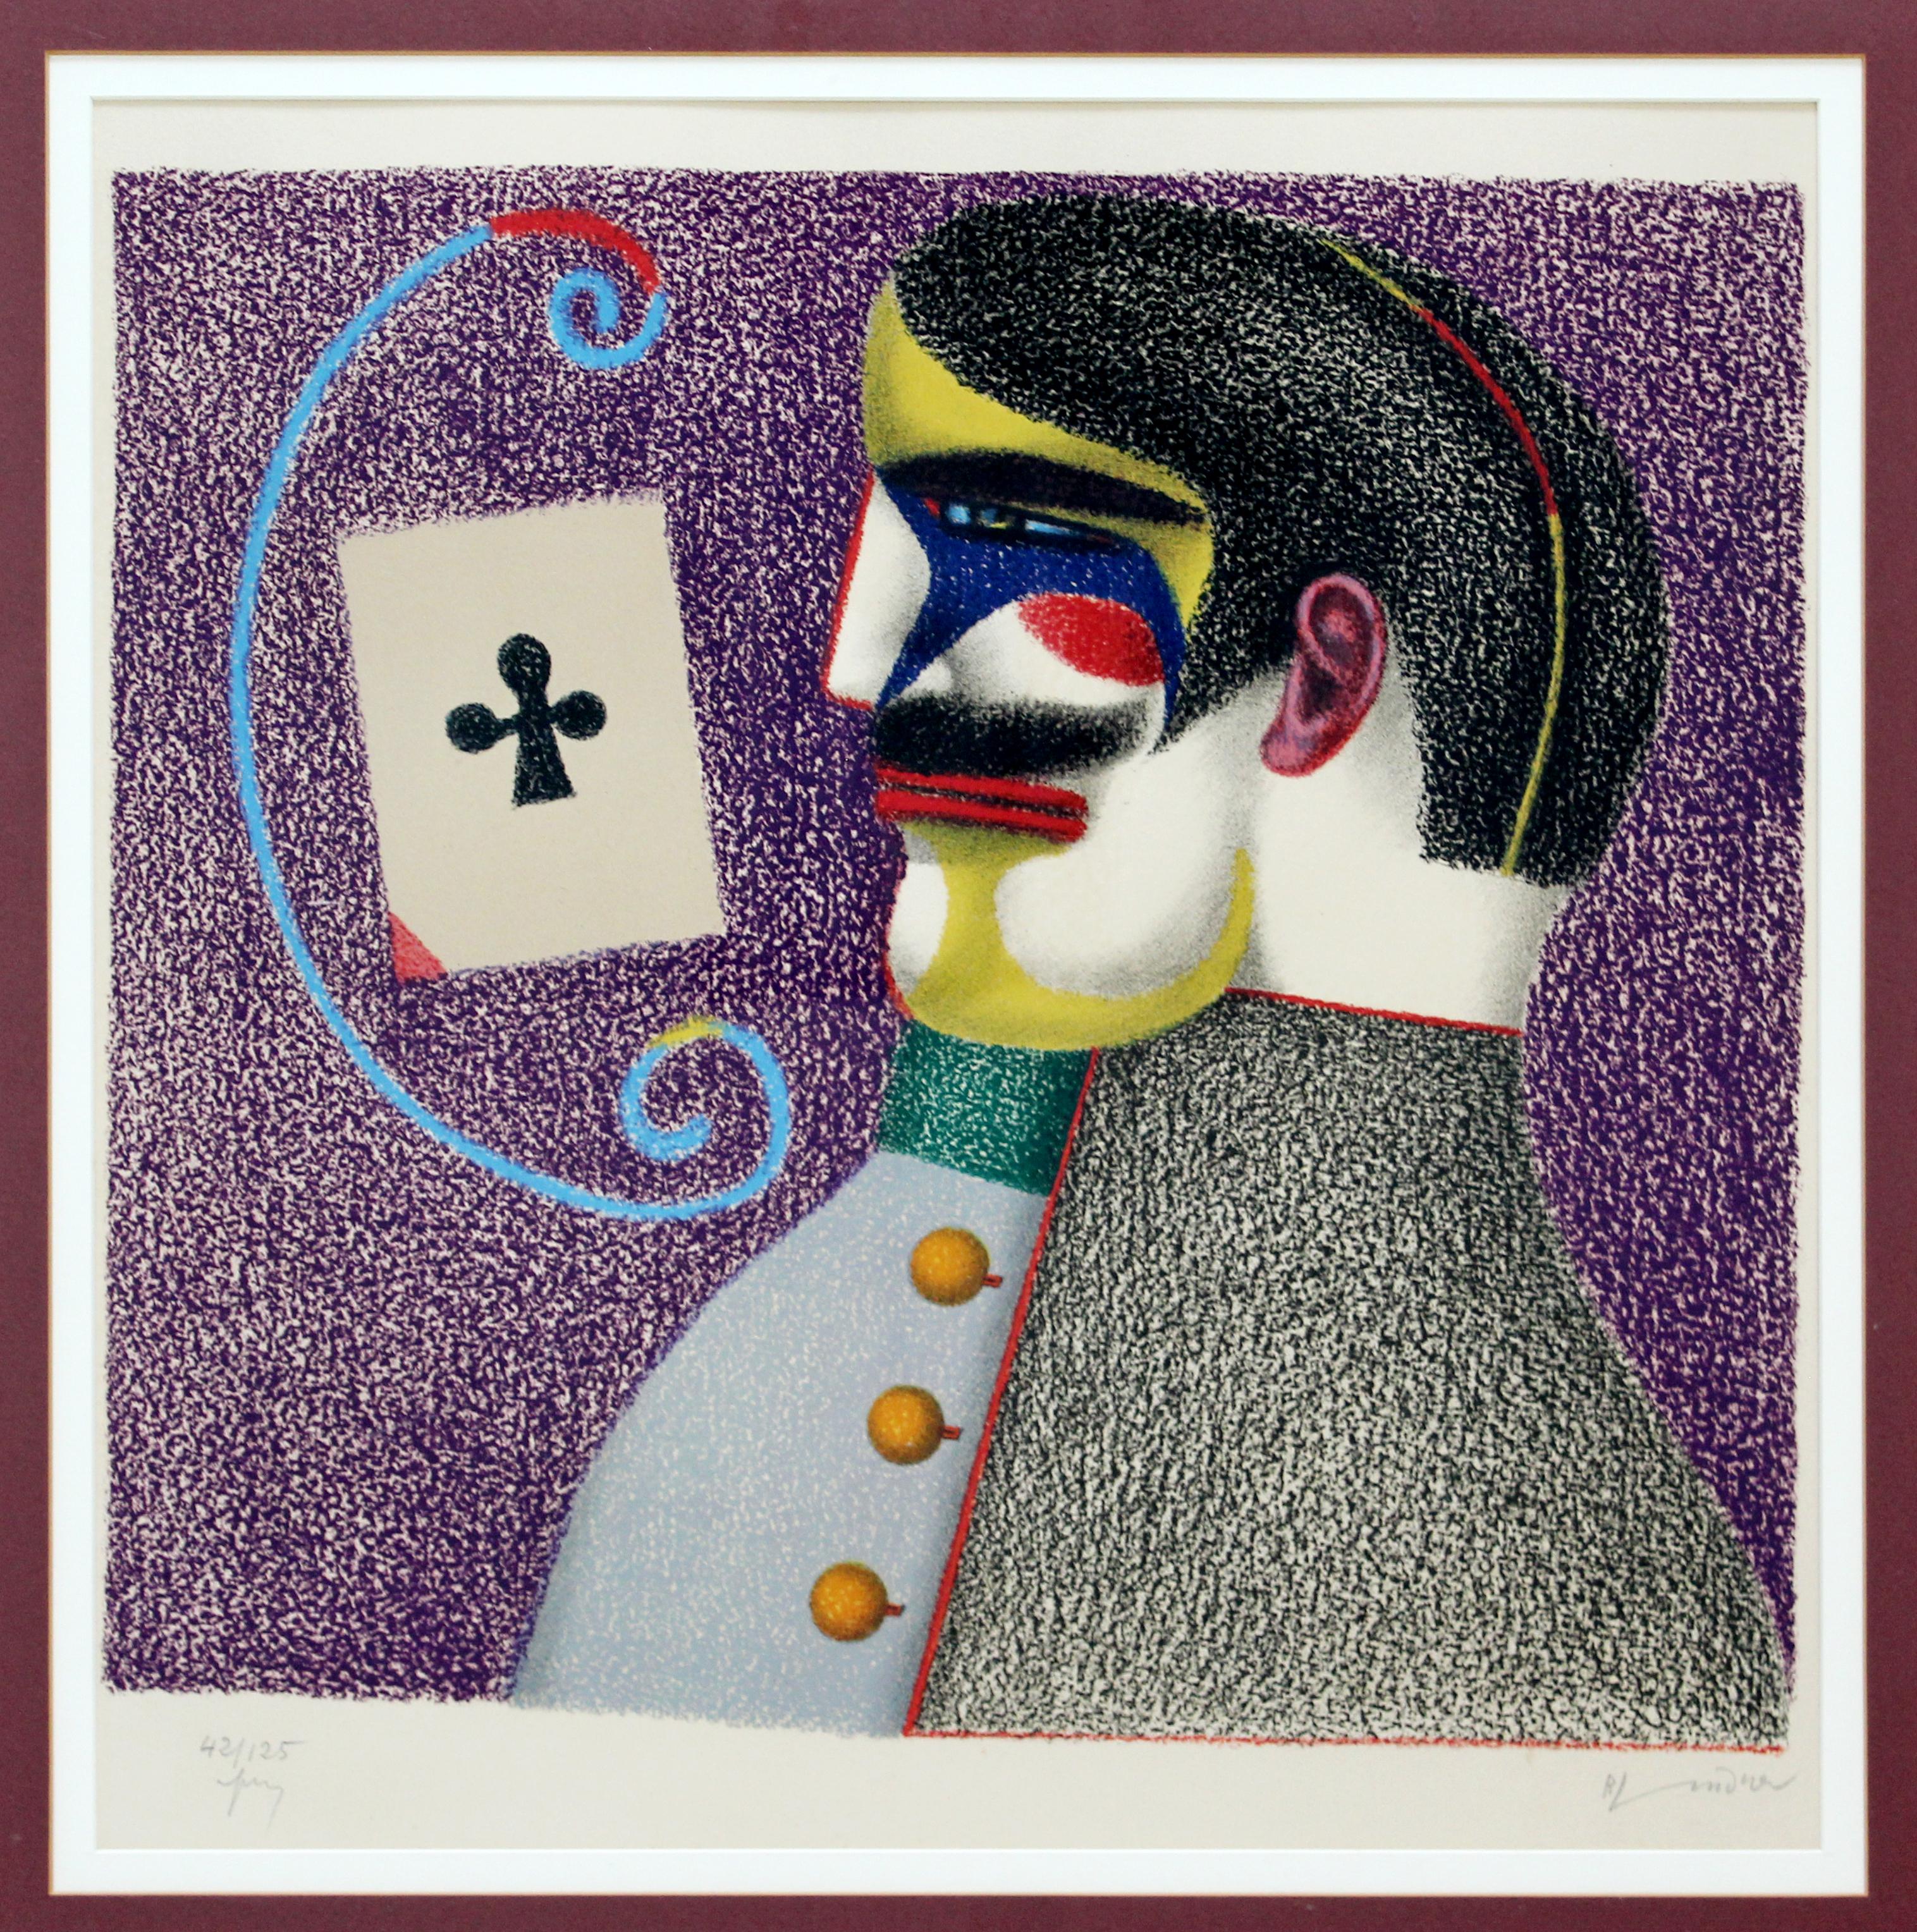 For your consideration is a framed Lithograph, pencil signed by Richard Lindner, numbered 42/125, circa 1975. In good condition. The dimensions are 30.25